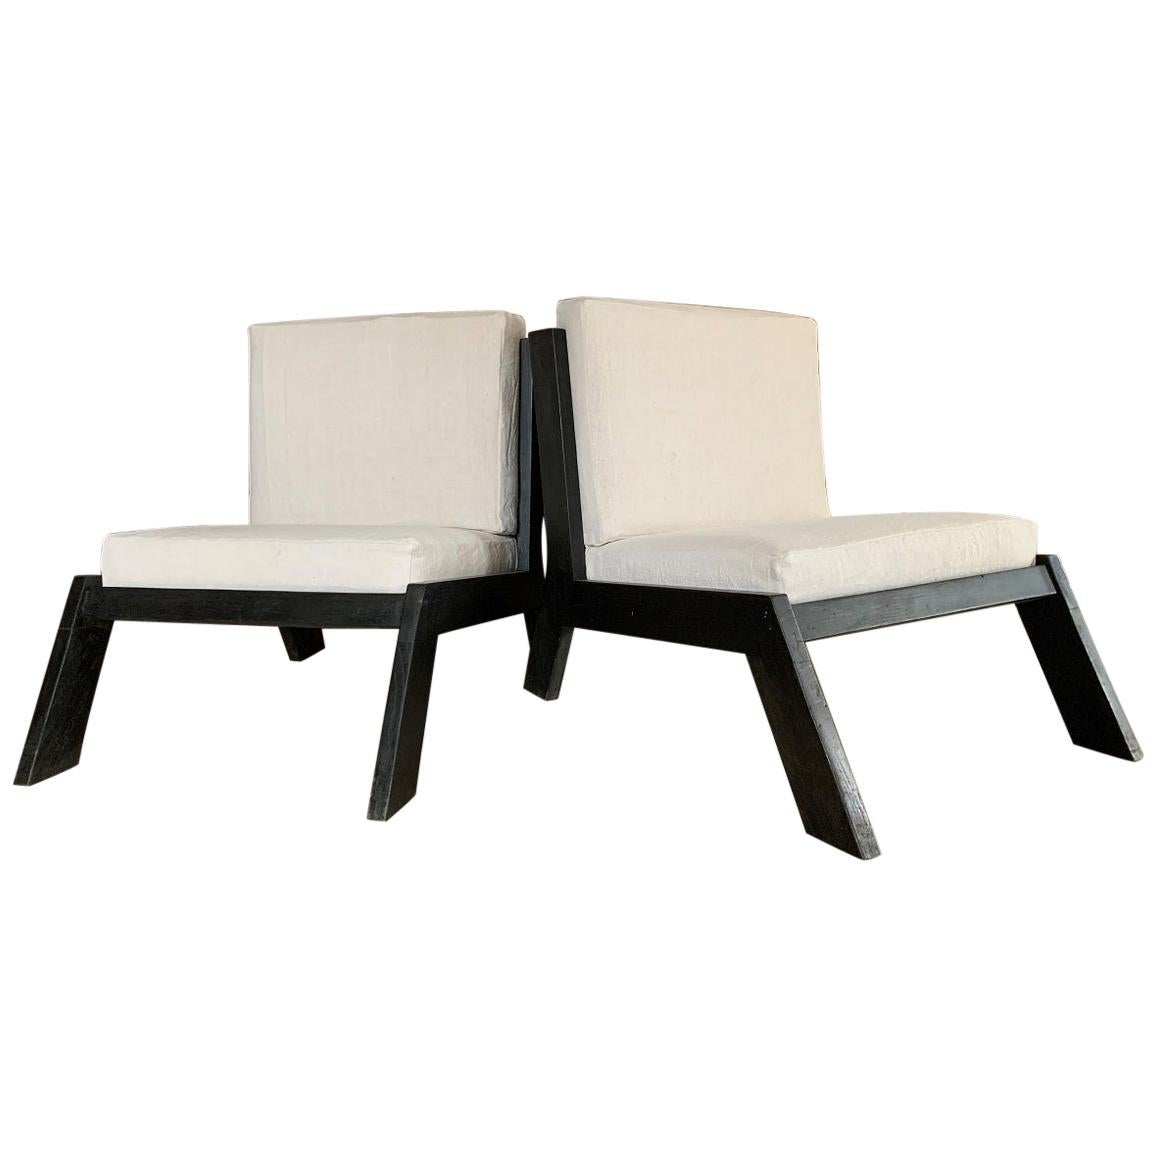 Set of 2 Cubist 1970s Lounge Chairs